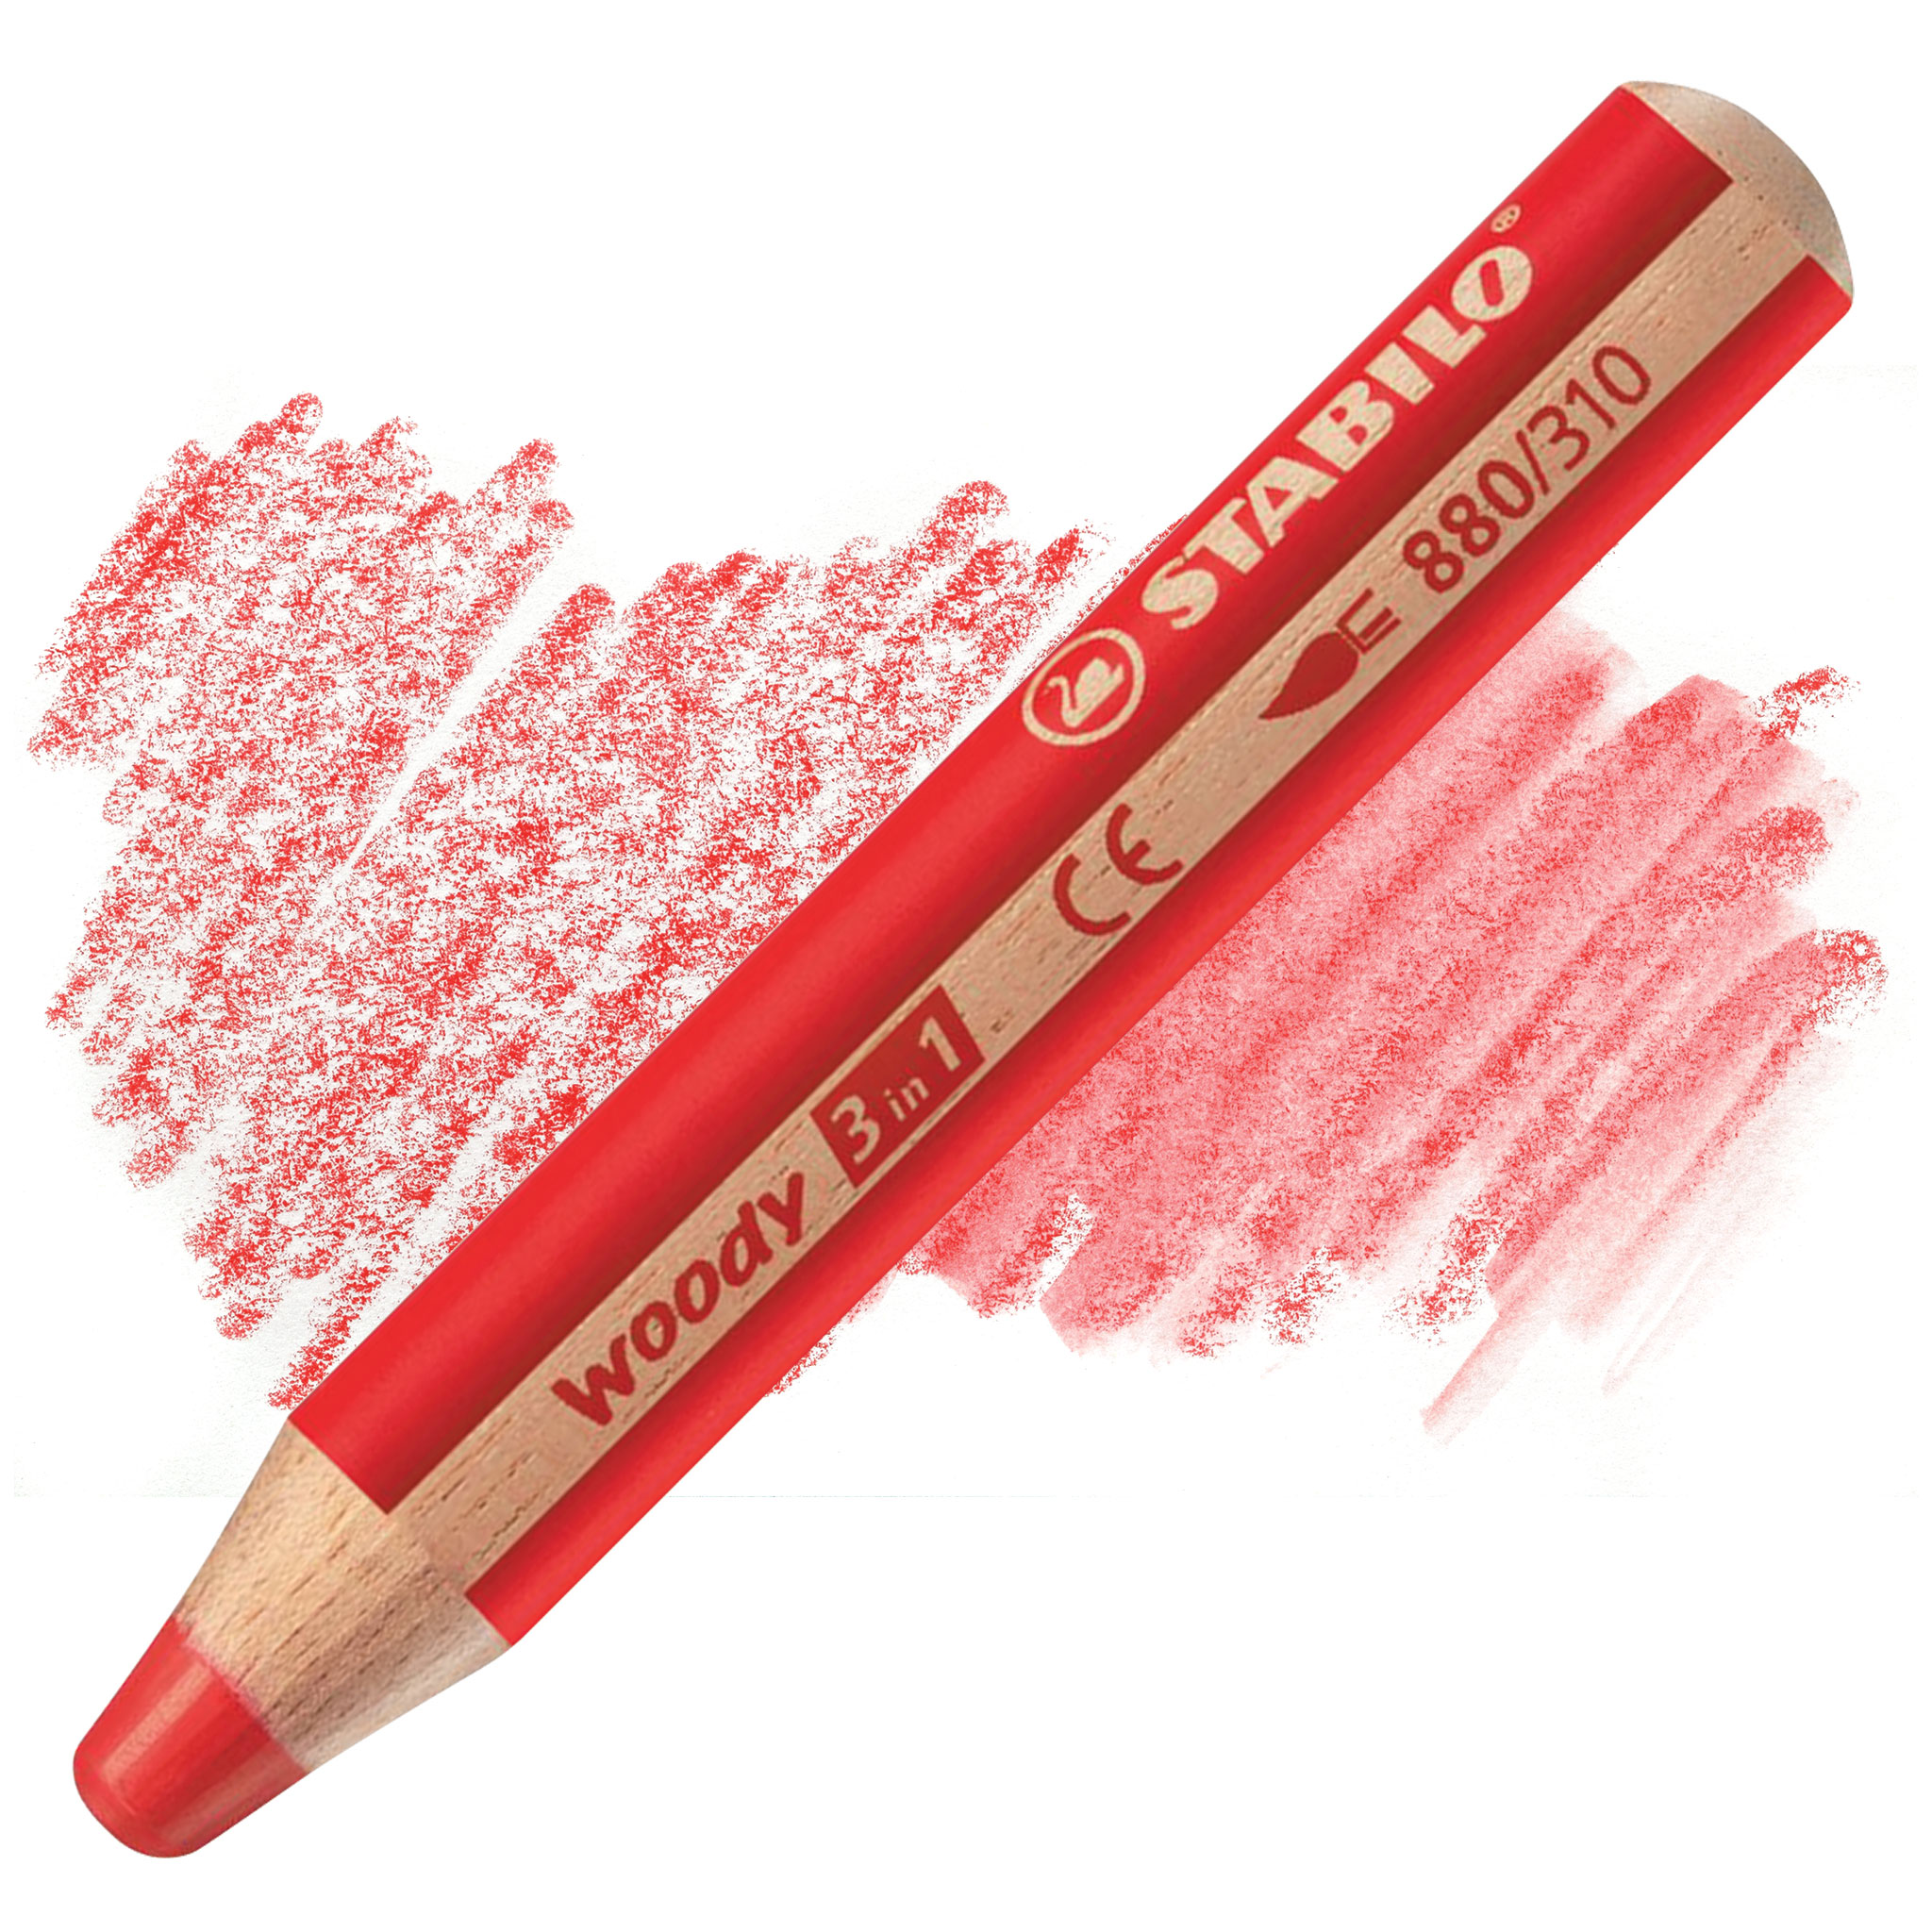 Stabilo Woody 3 in 1 Pencil - Red